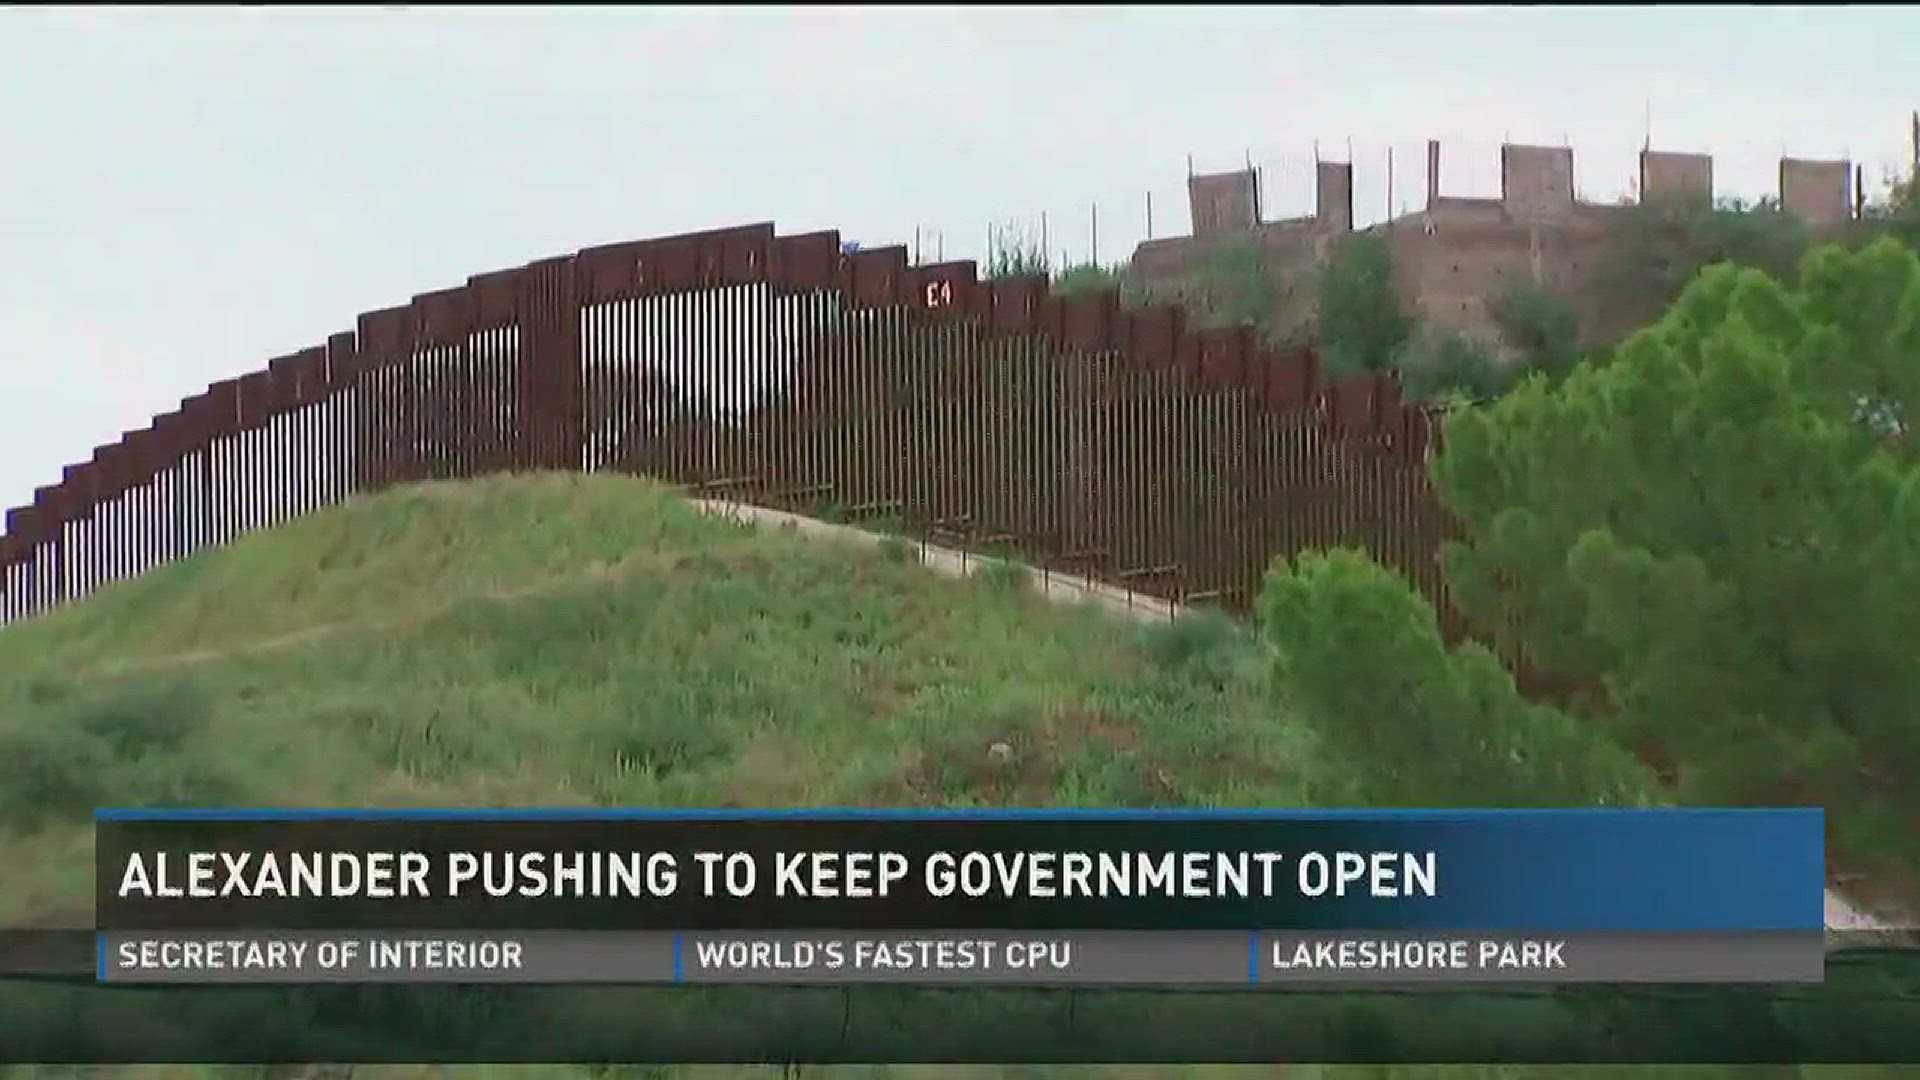 Aug. 24, 2017: After President Donald Trump threatened a government shut down if lawmakers don't support his border wall with Mexico, Tennessee Sen. Lamar Alexander says he was not elected to shut down the government.